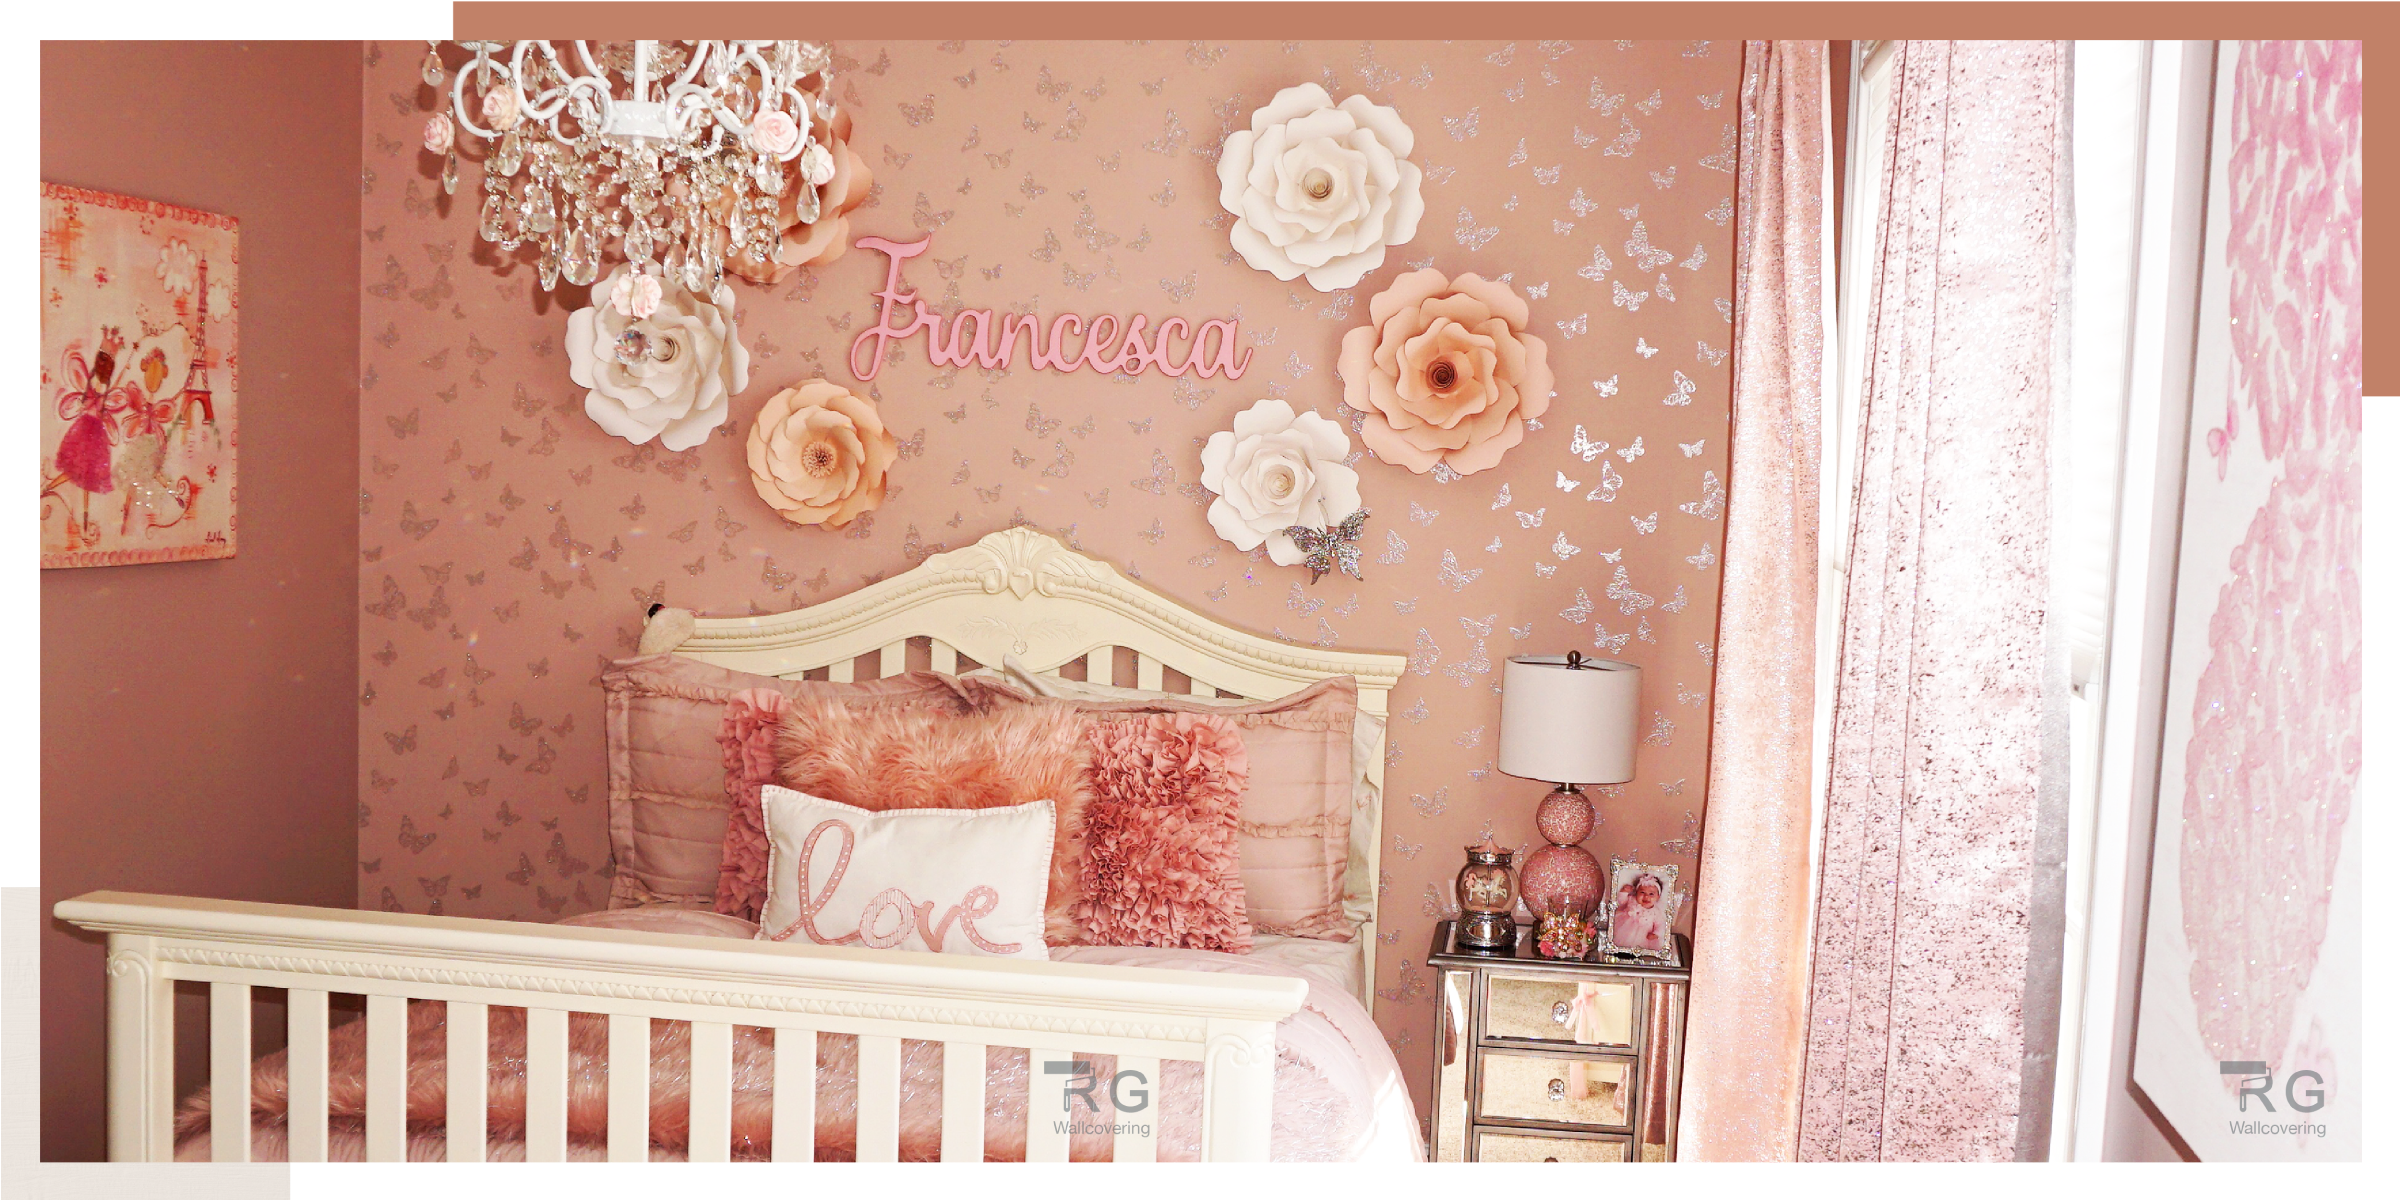 Decorating a girl’s room